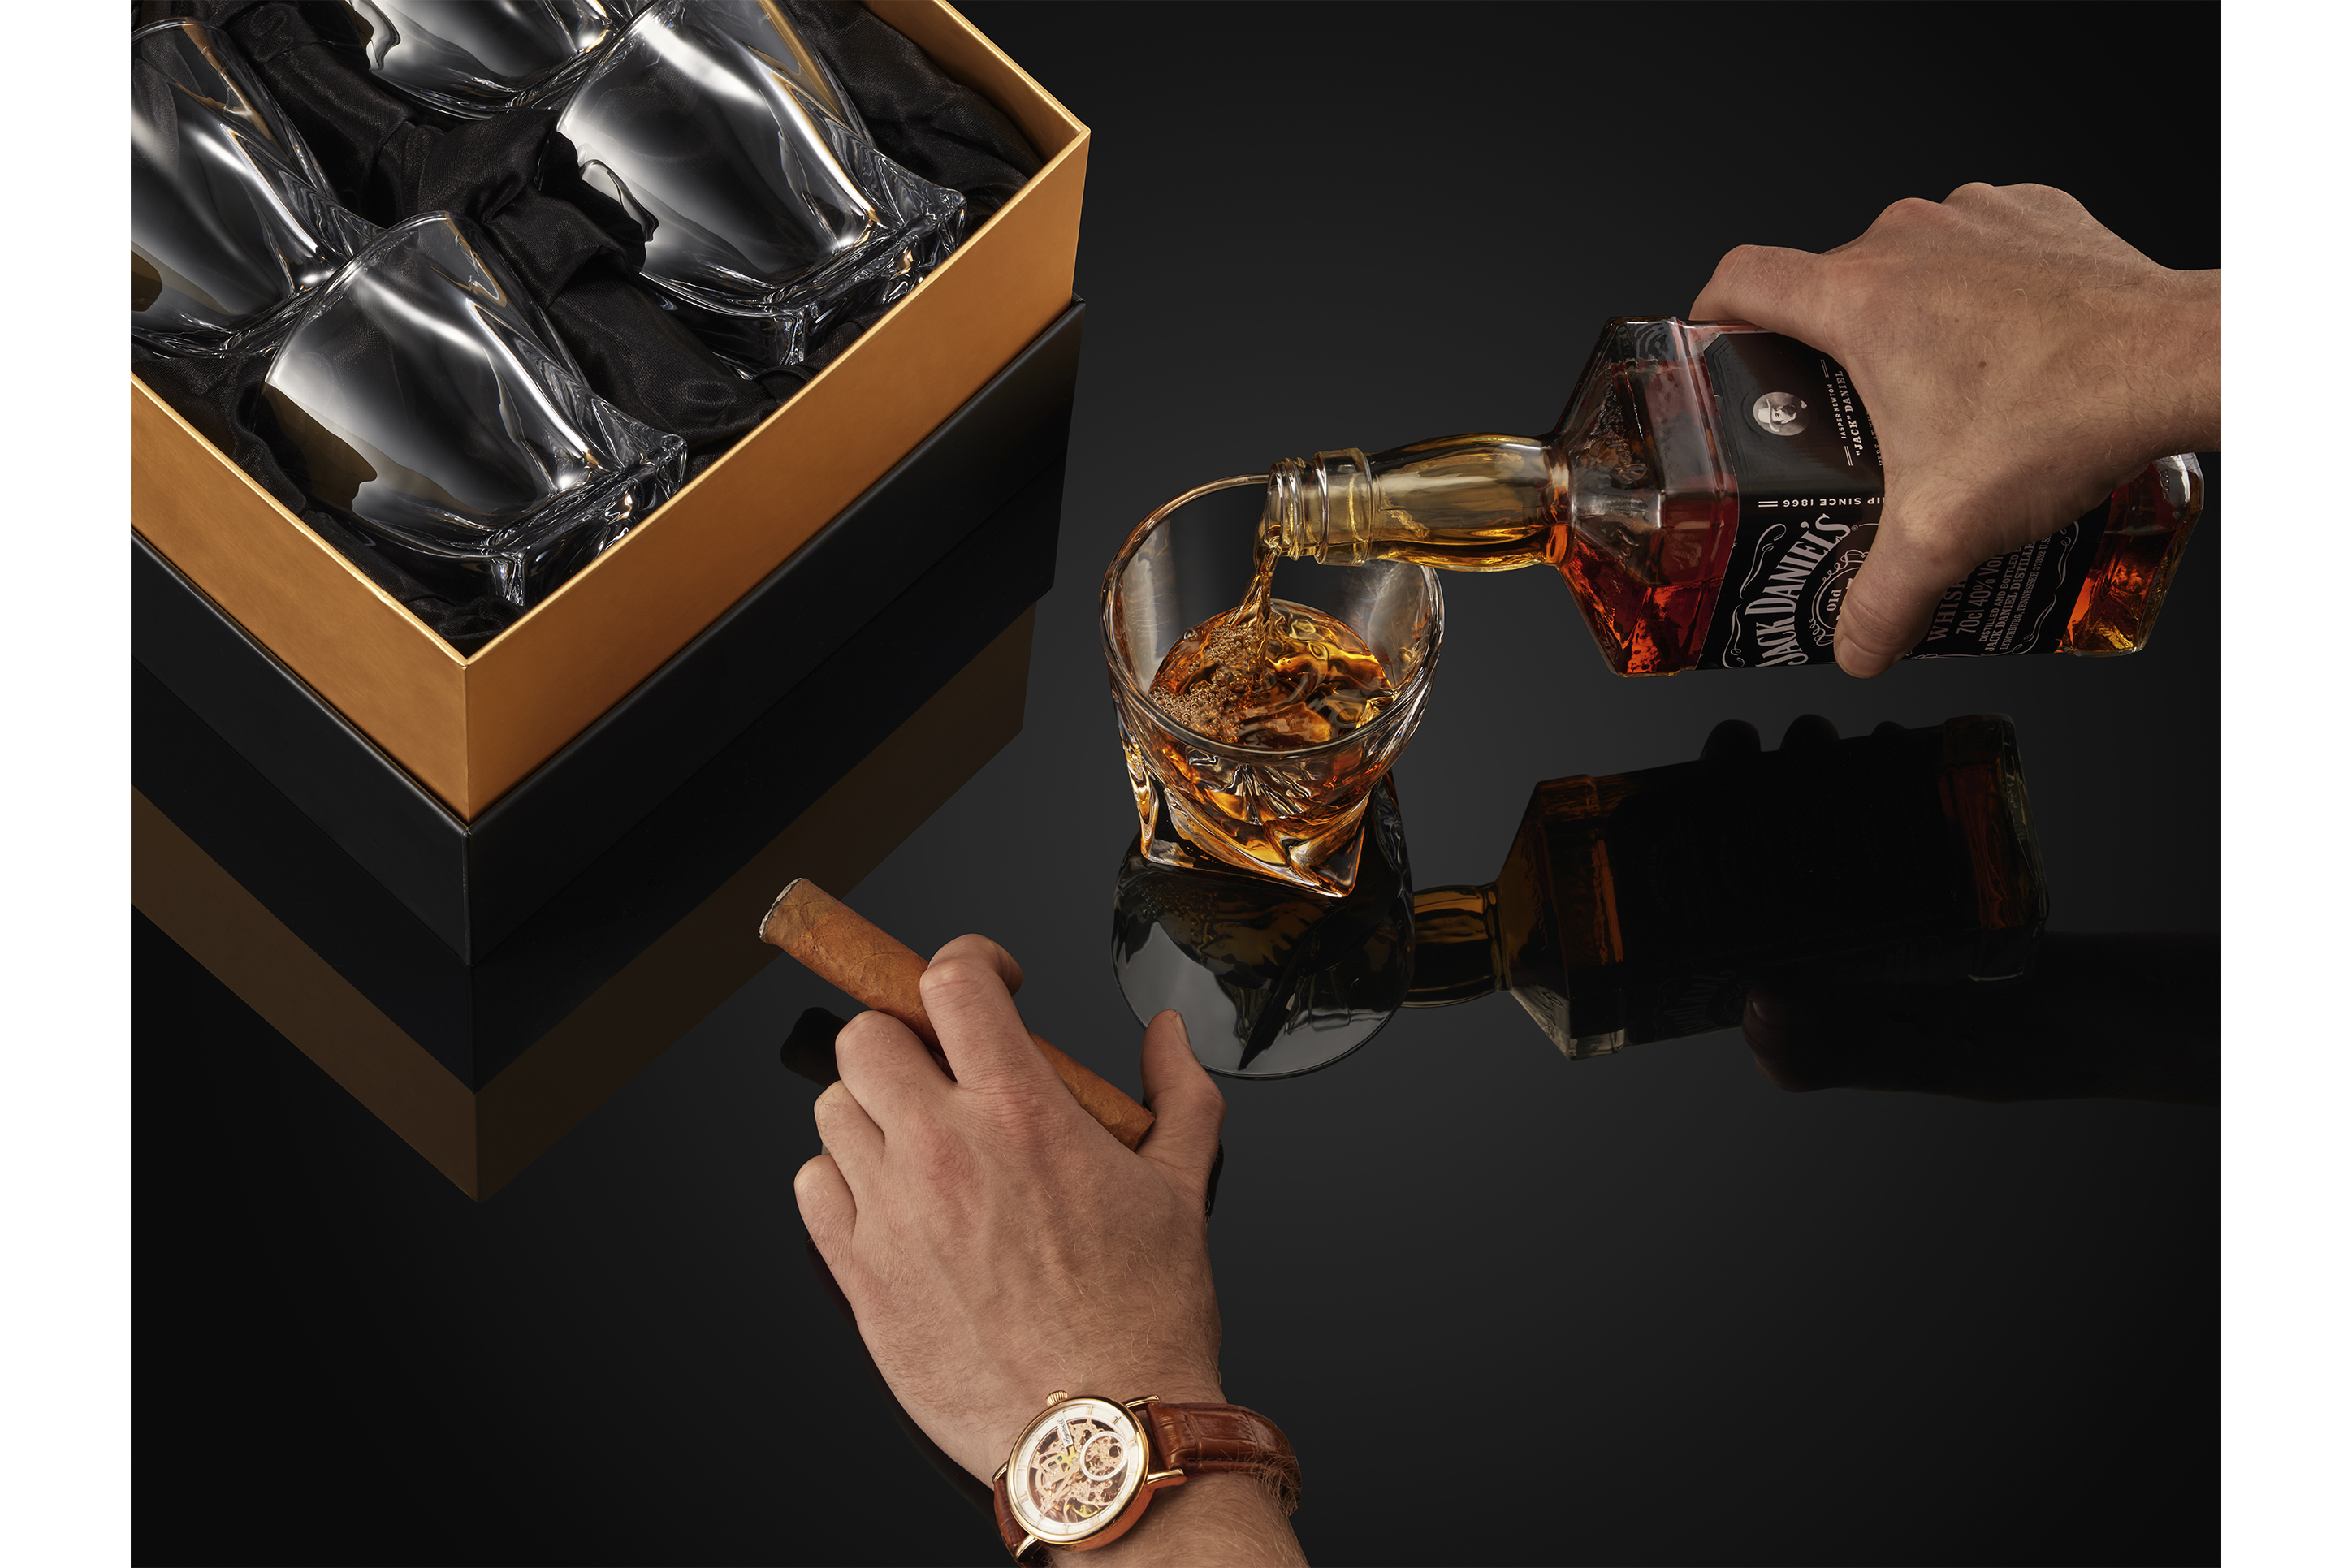 Person pouring whisky into glass on a back backdrop with whisky glass in packaging photo shoot